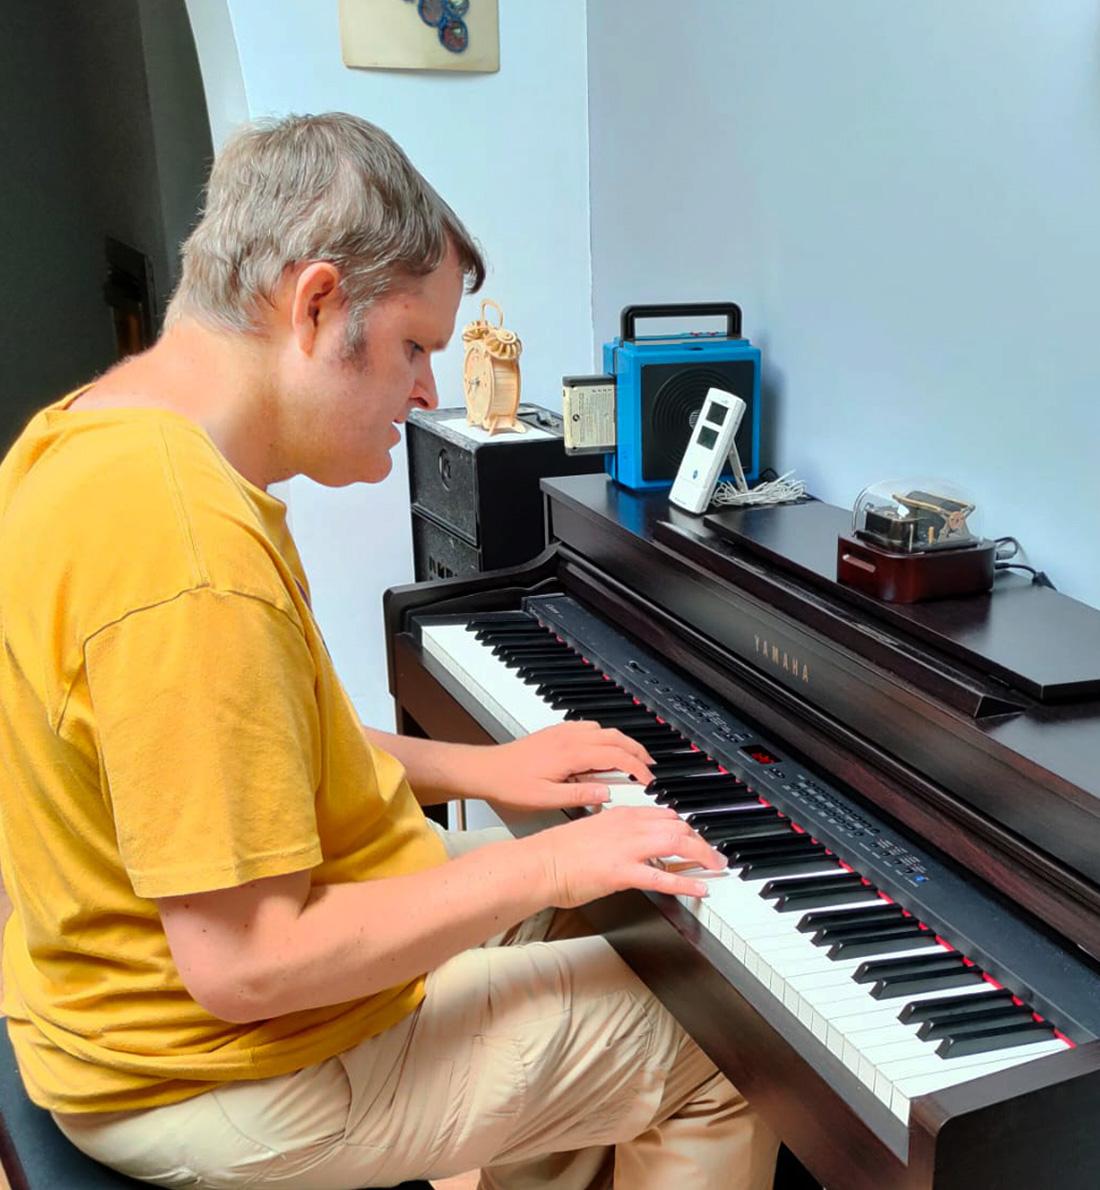 Geert playing piano with Muro Box on top of the piano